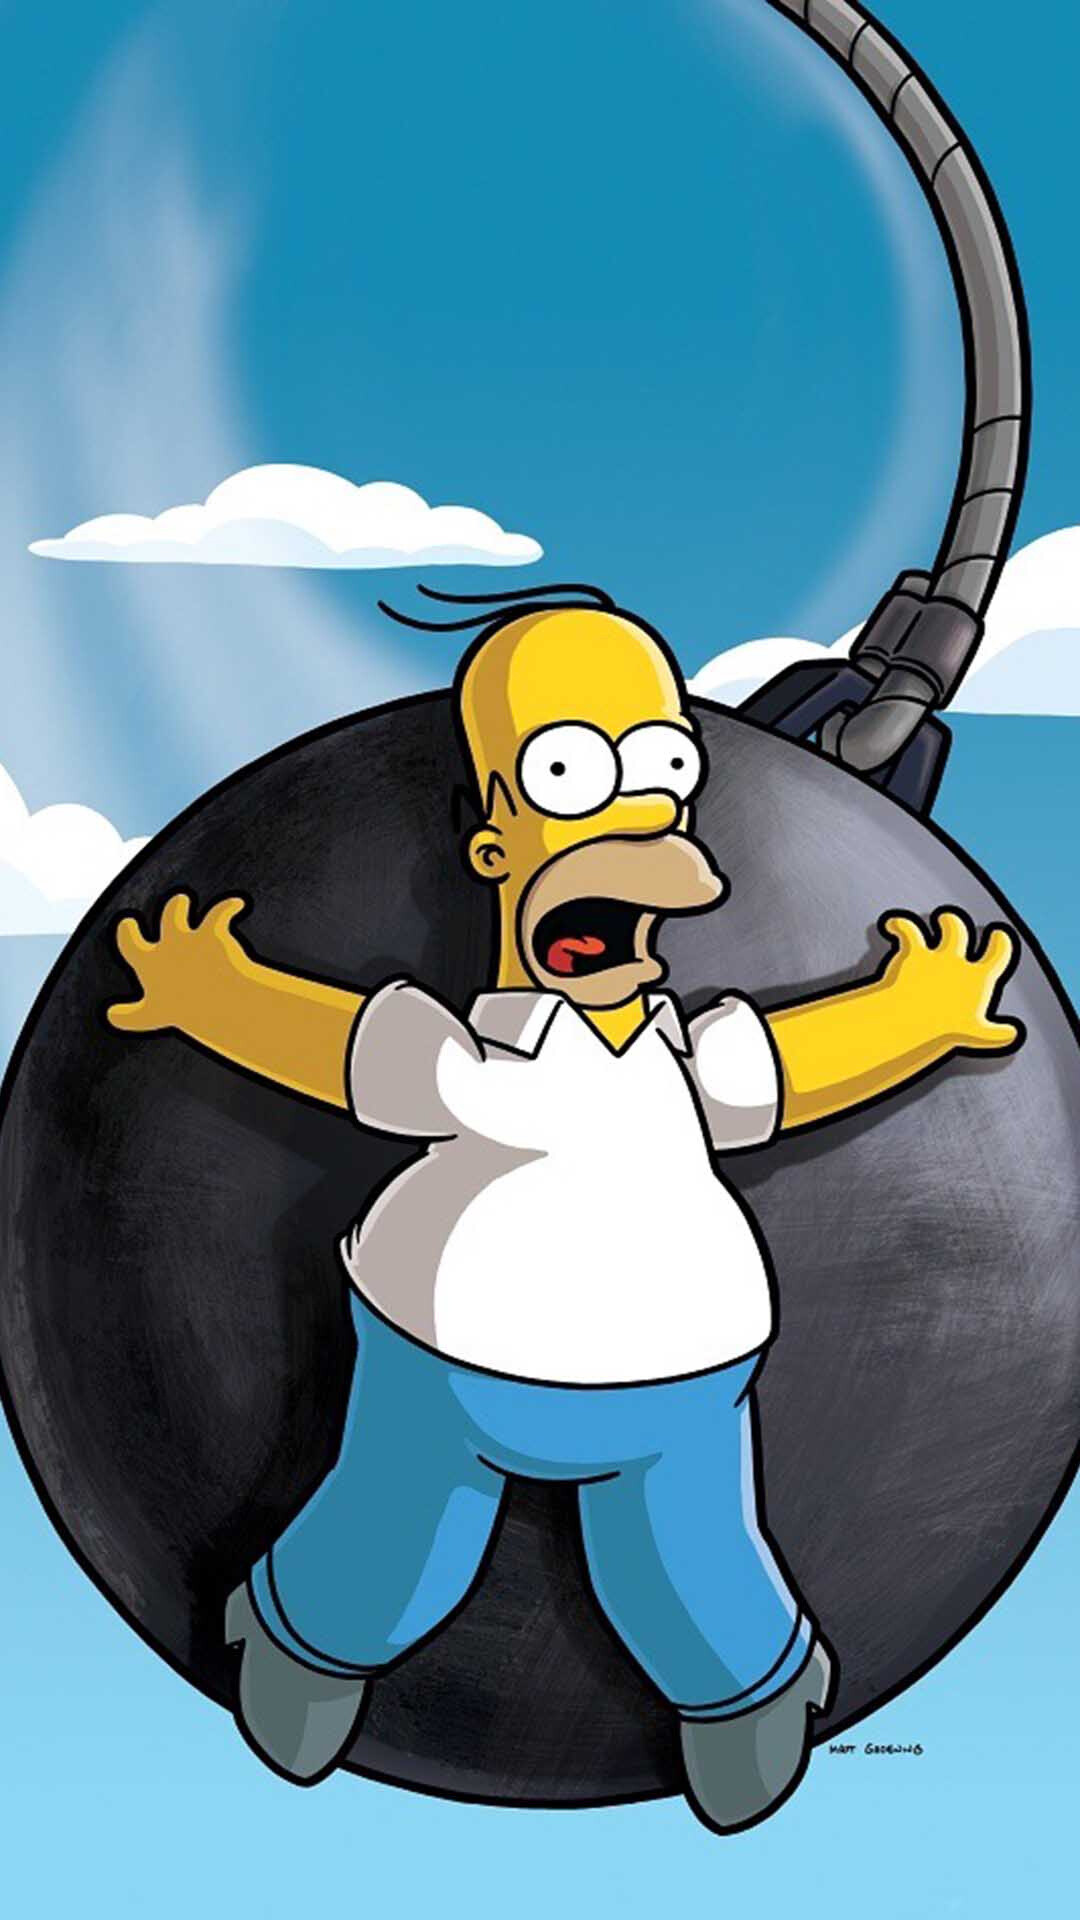 The Simpsons: Homer's exclamatory catchphrase of "D'oh!" has been adopted into the English language. 1080x1920 Full HD Wallpaper.